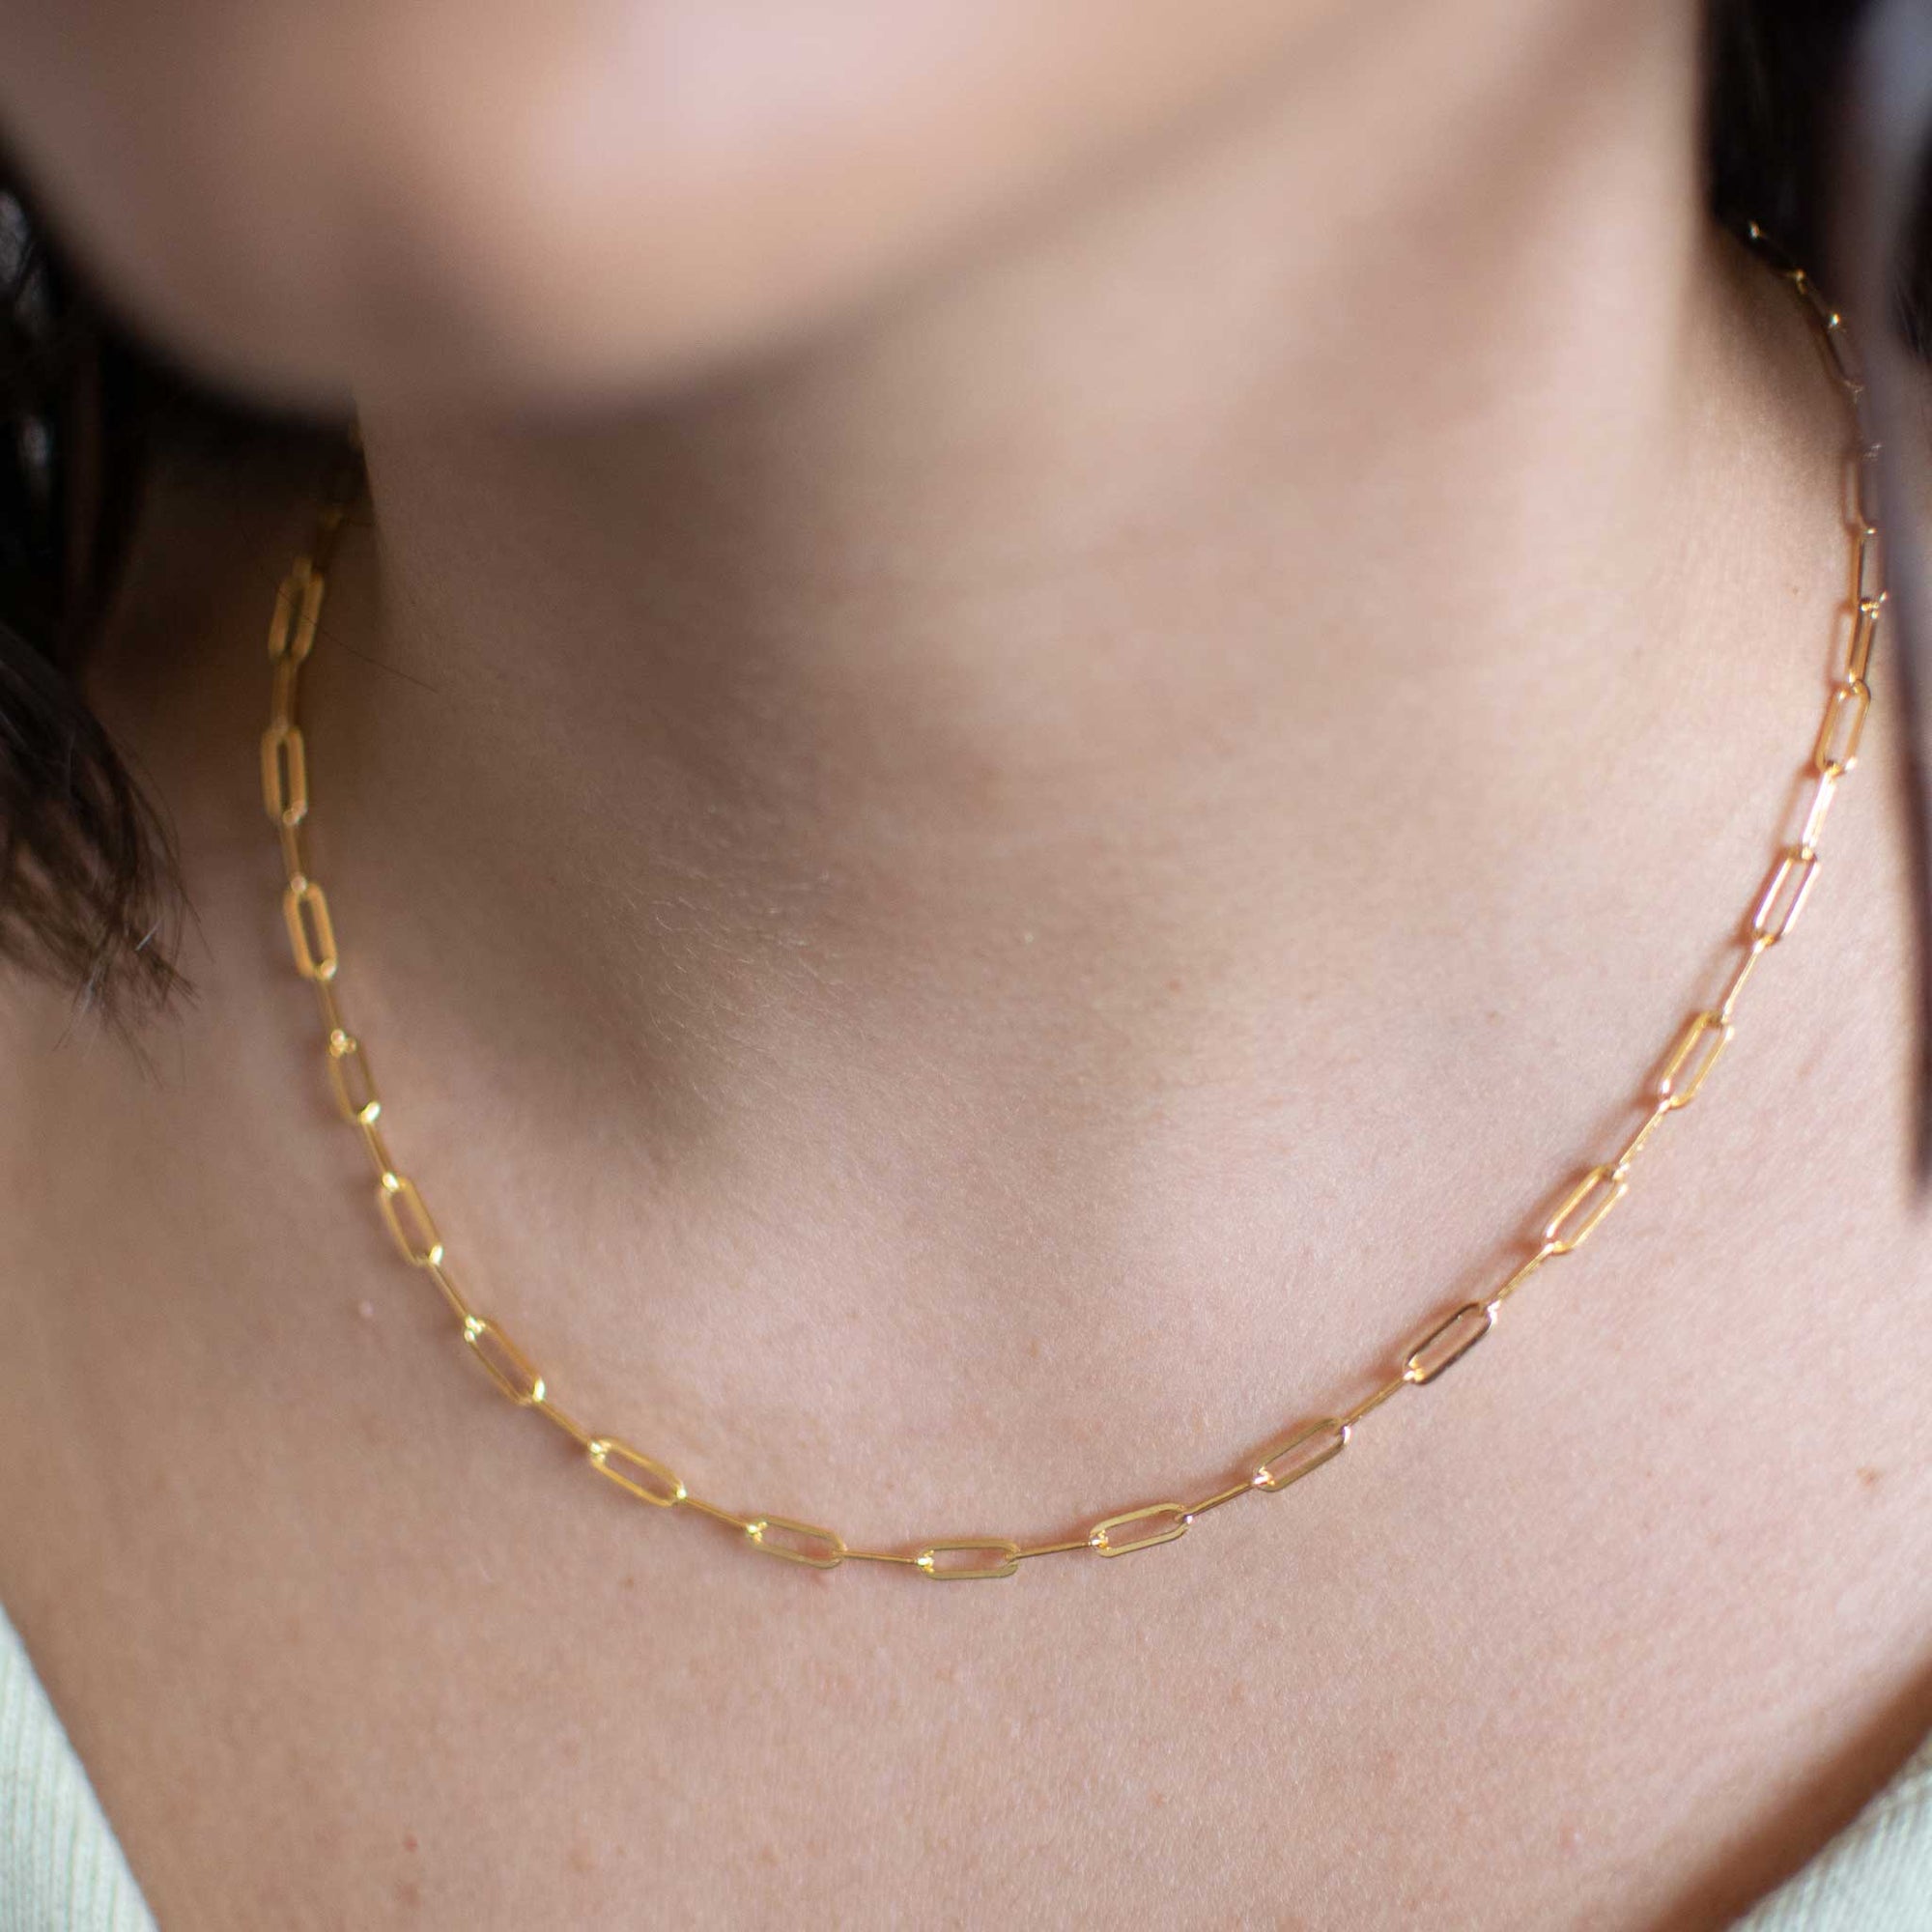 Close up of the gold bold link necklace being worn by a woman.